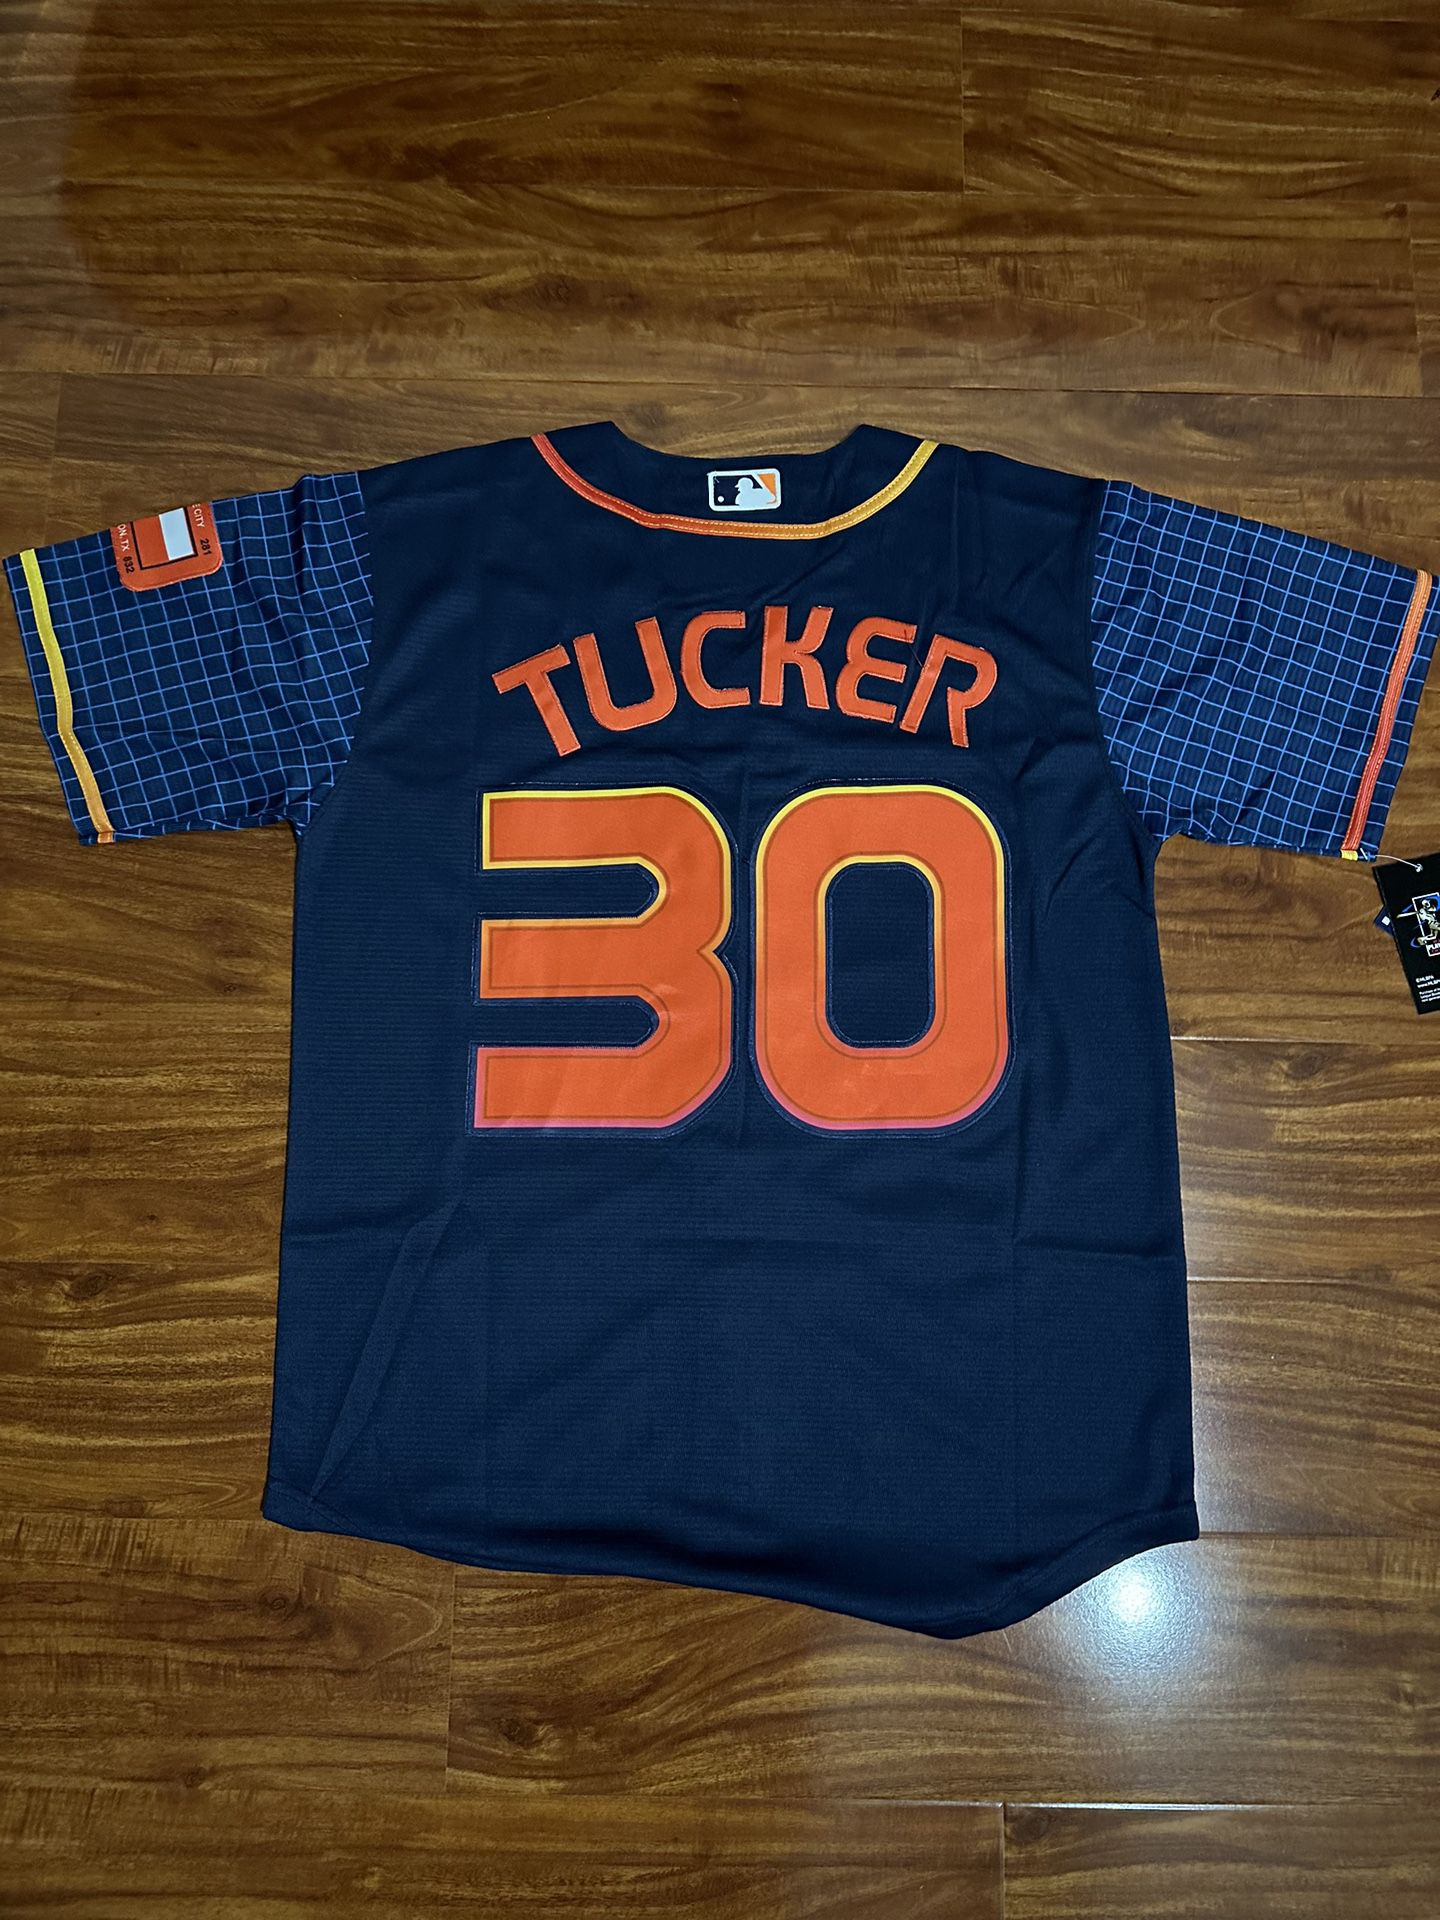 Houston Astros Jerseys (Black, White, Or Space City) for Sale in